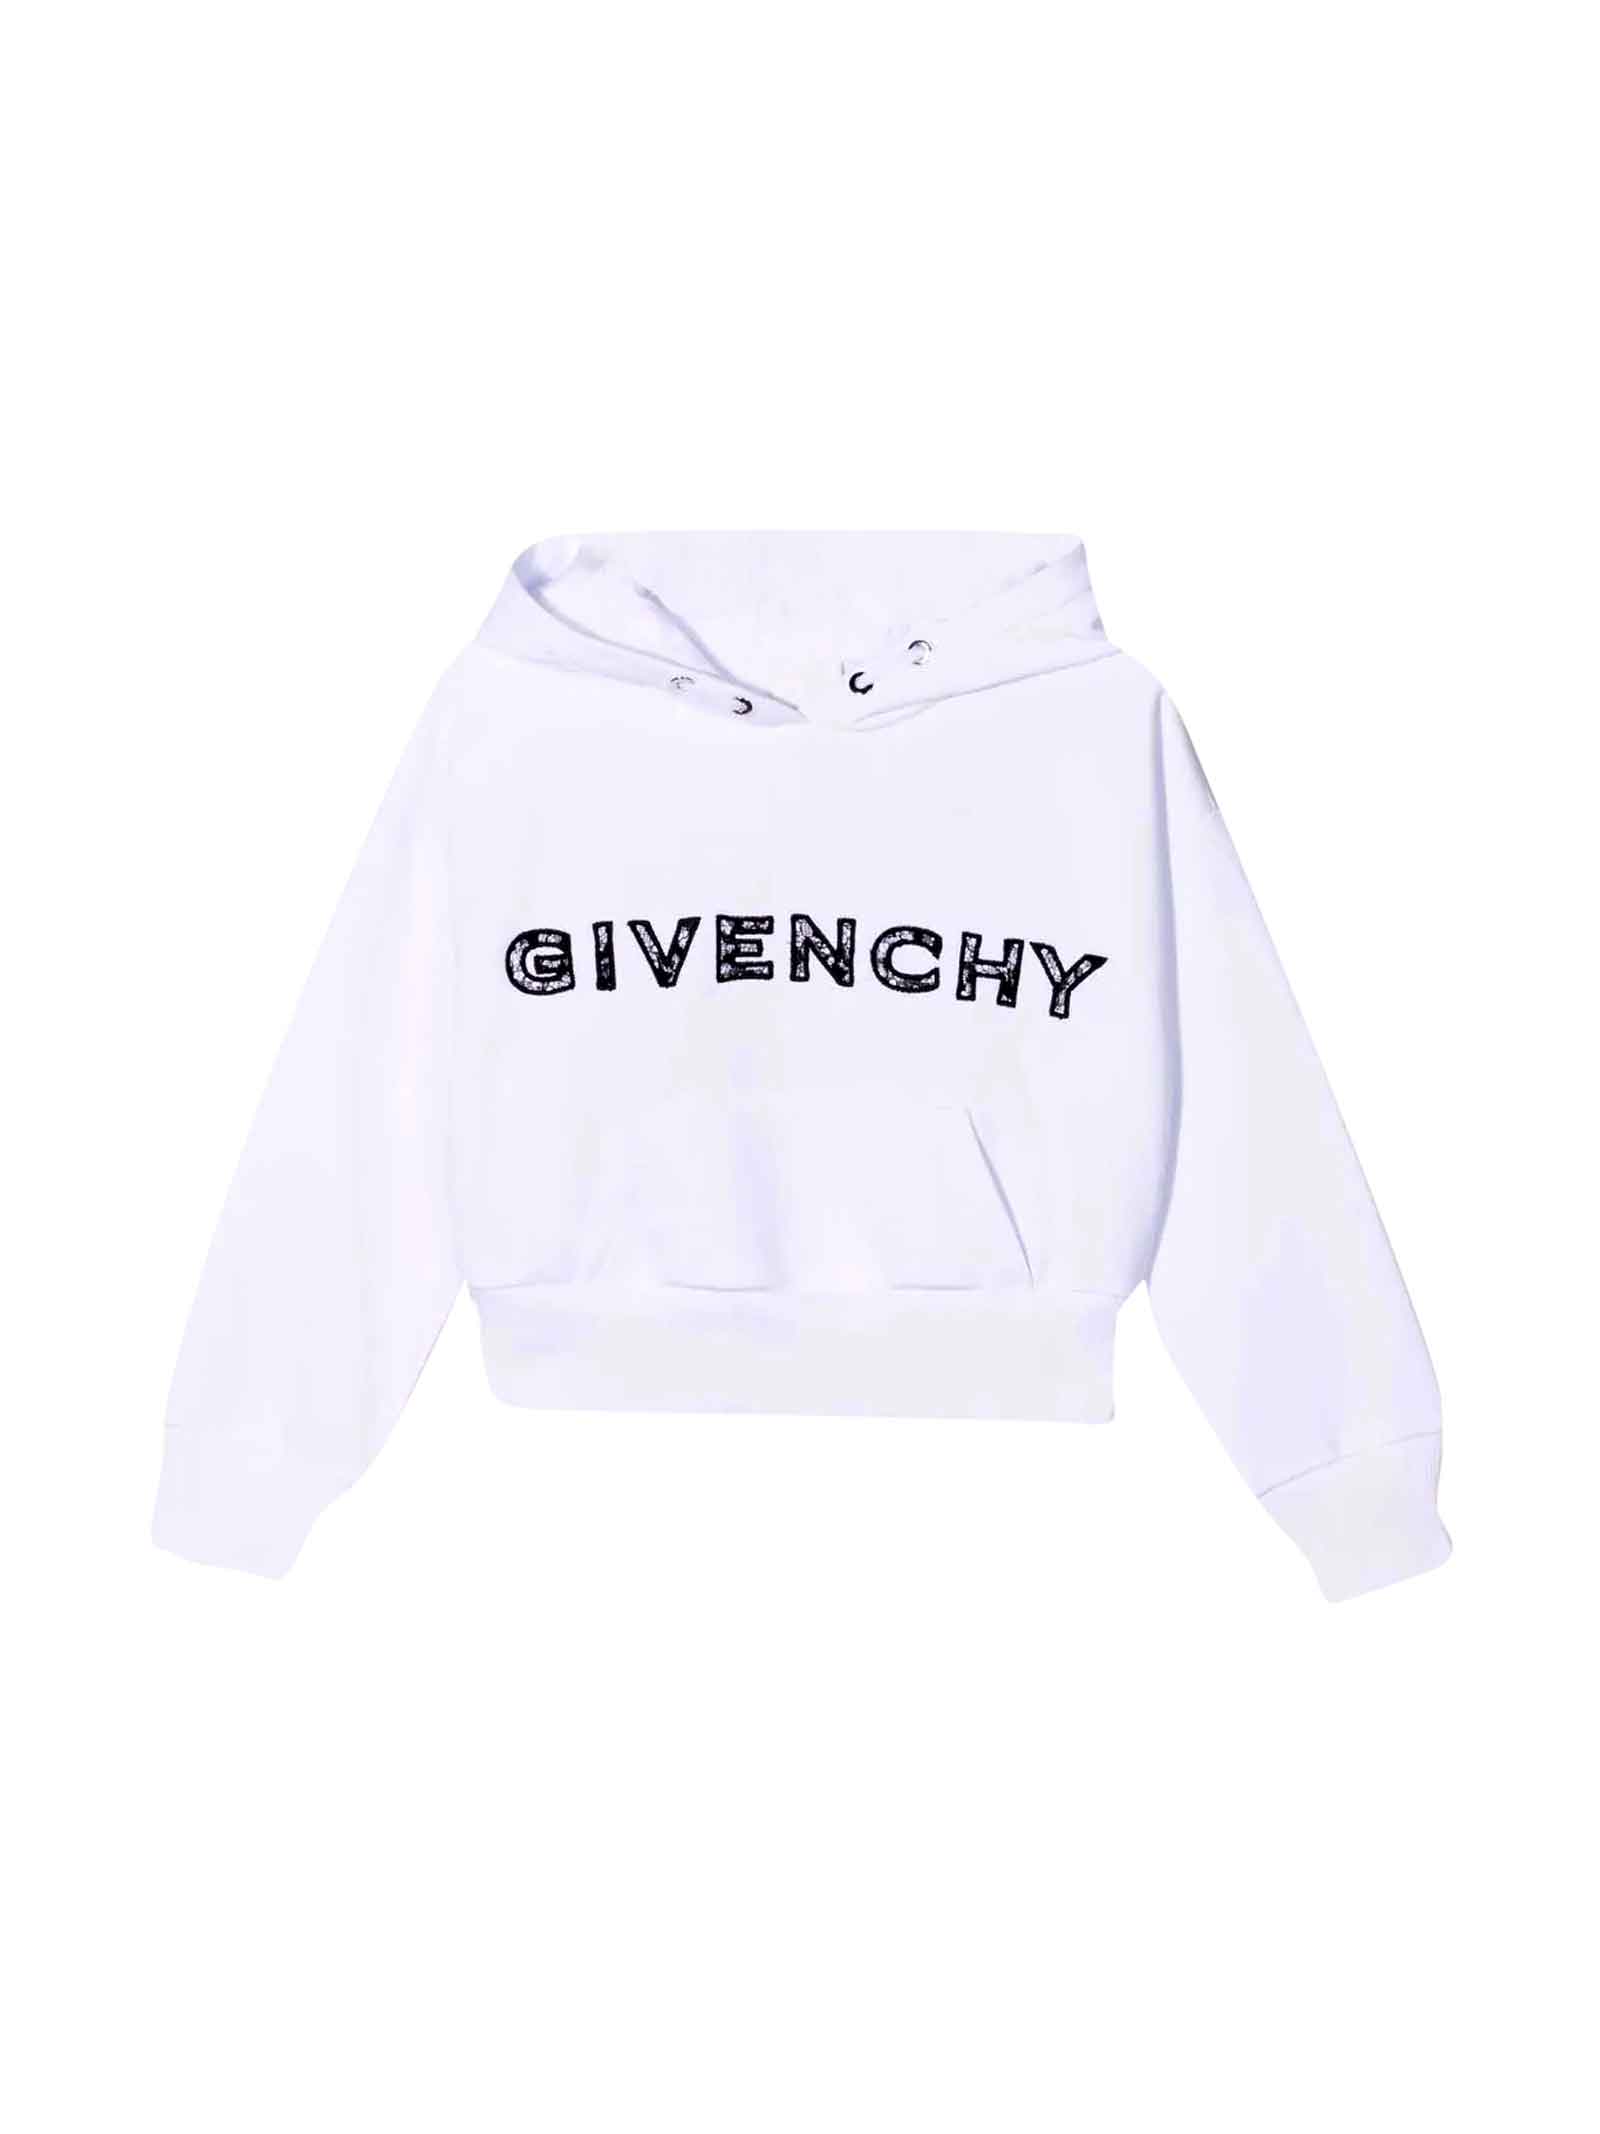 Givenchy White Sweatshirt With Print And Hood